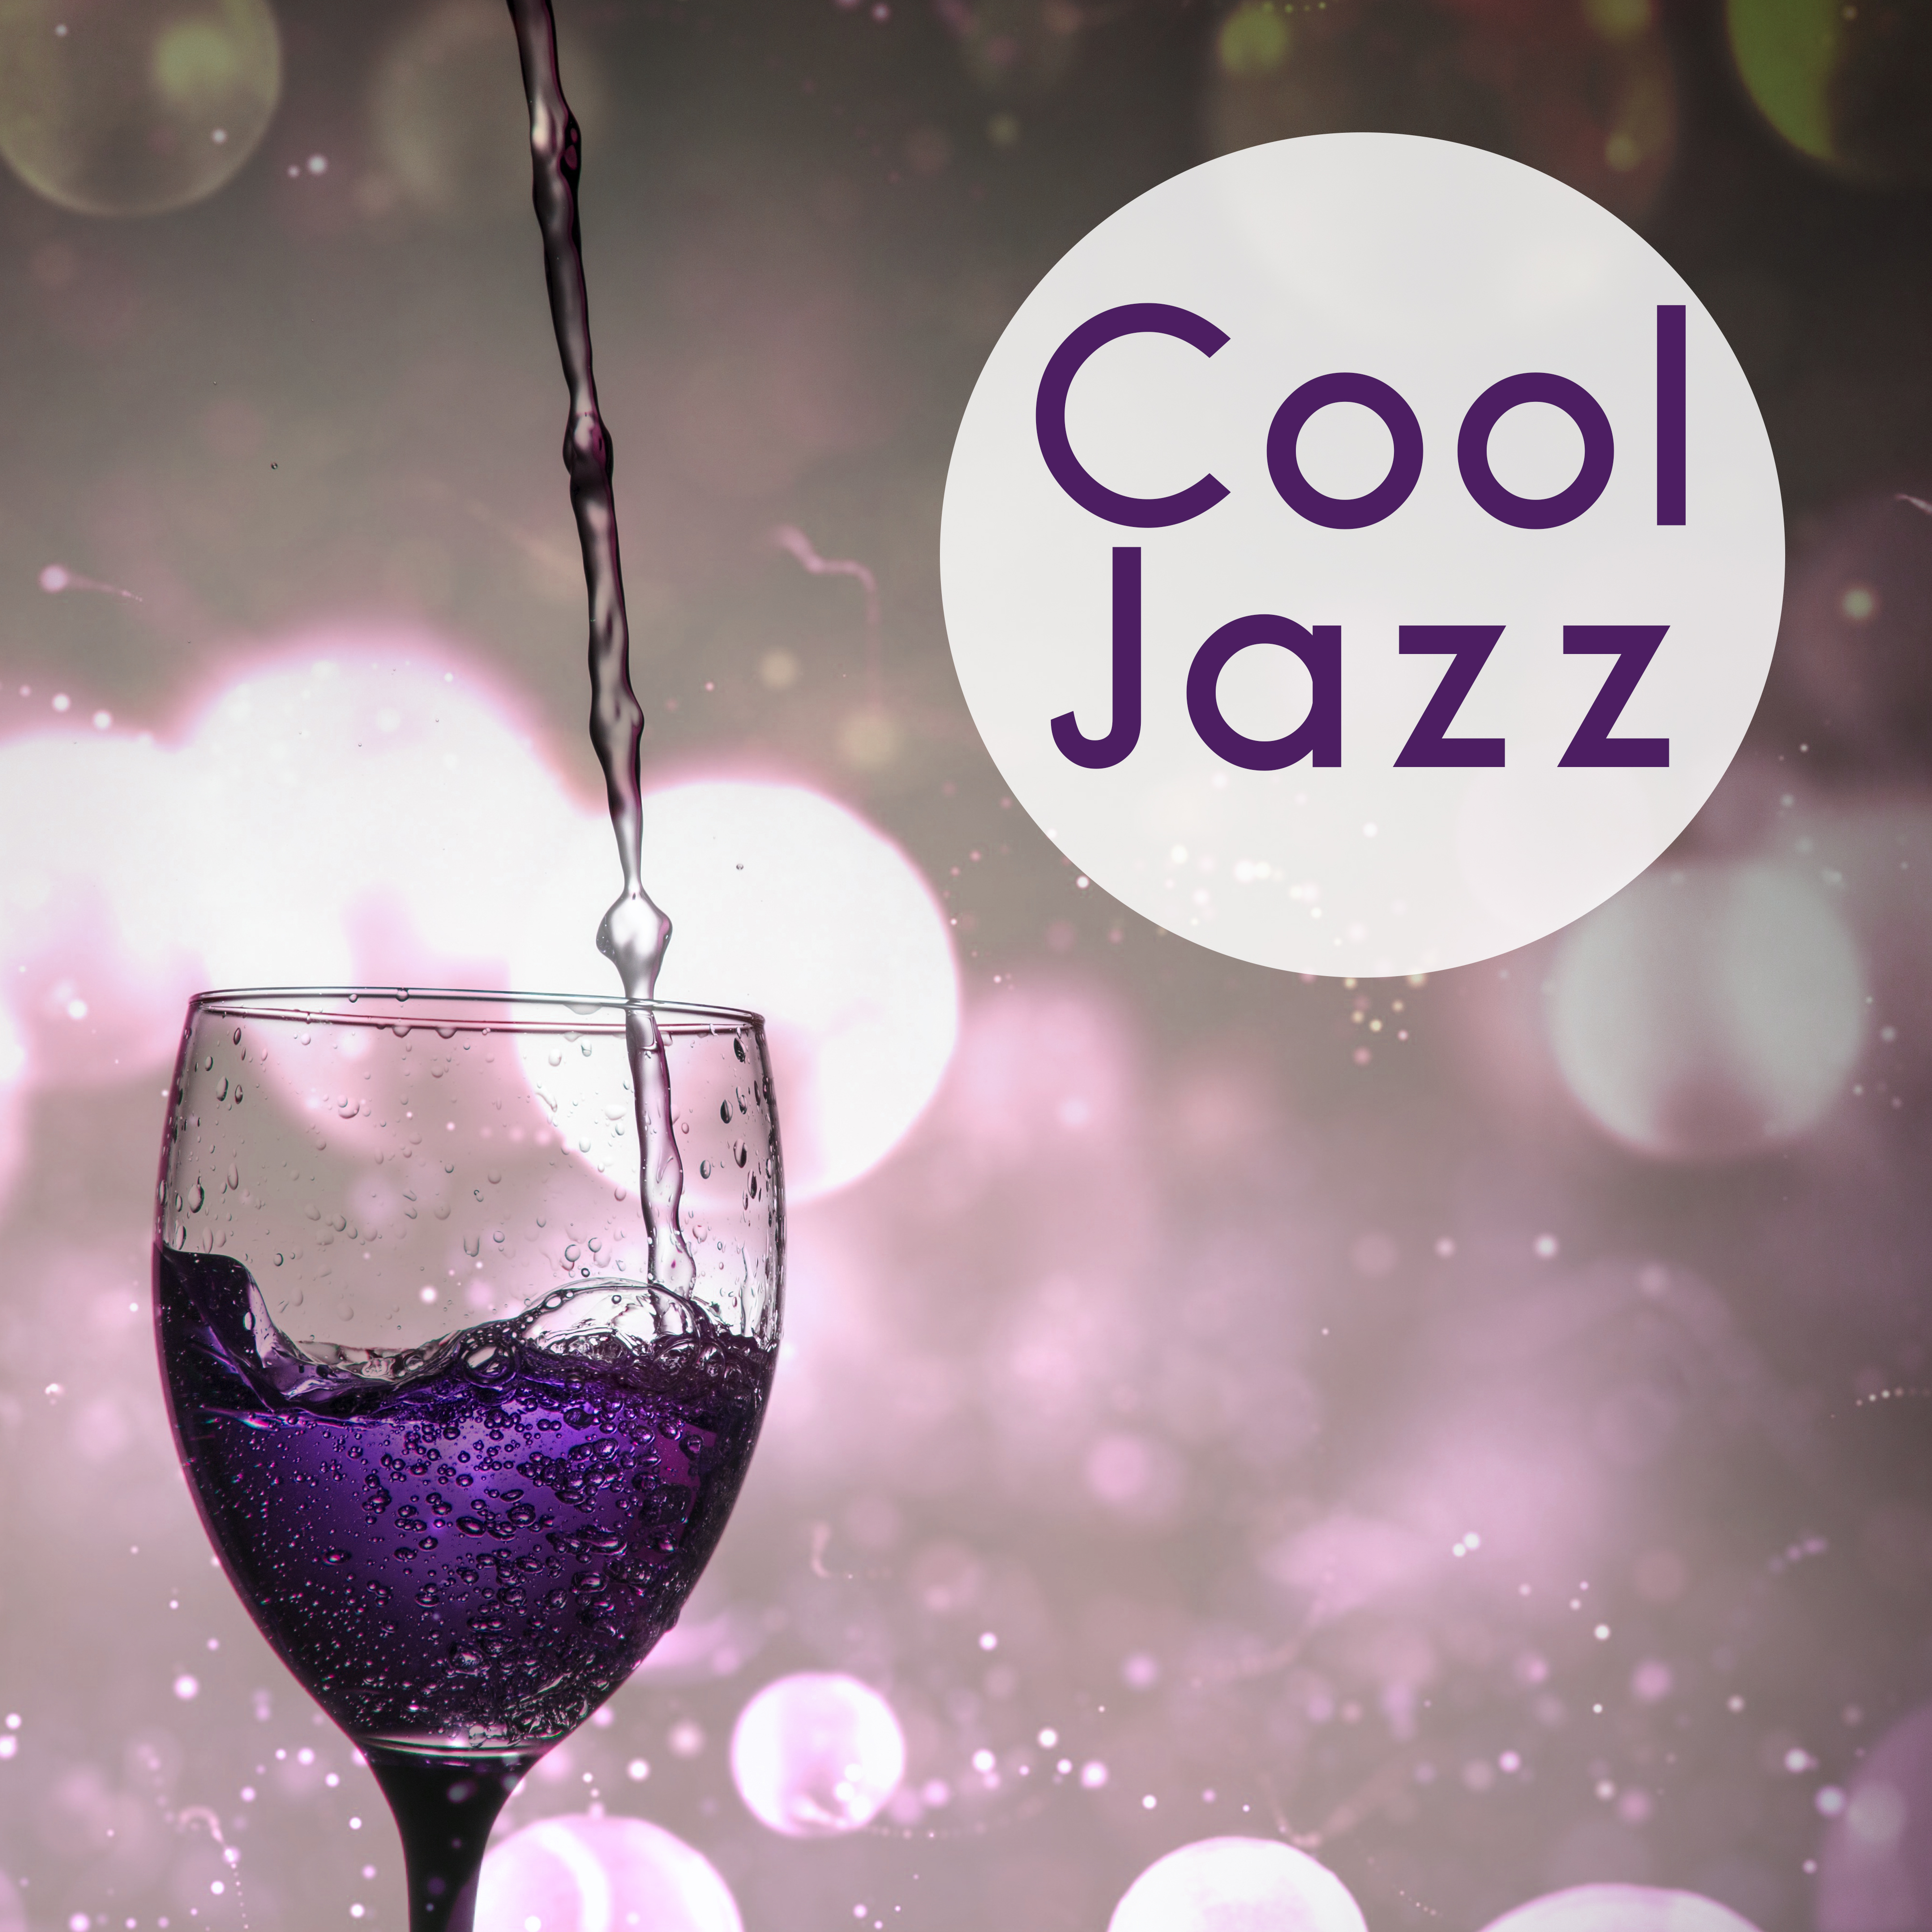 Cool Jazz  Piano Bar, Jazz Instrumental, Ambient Lounge, Relaxed Piano Music